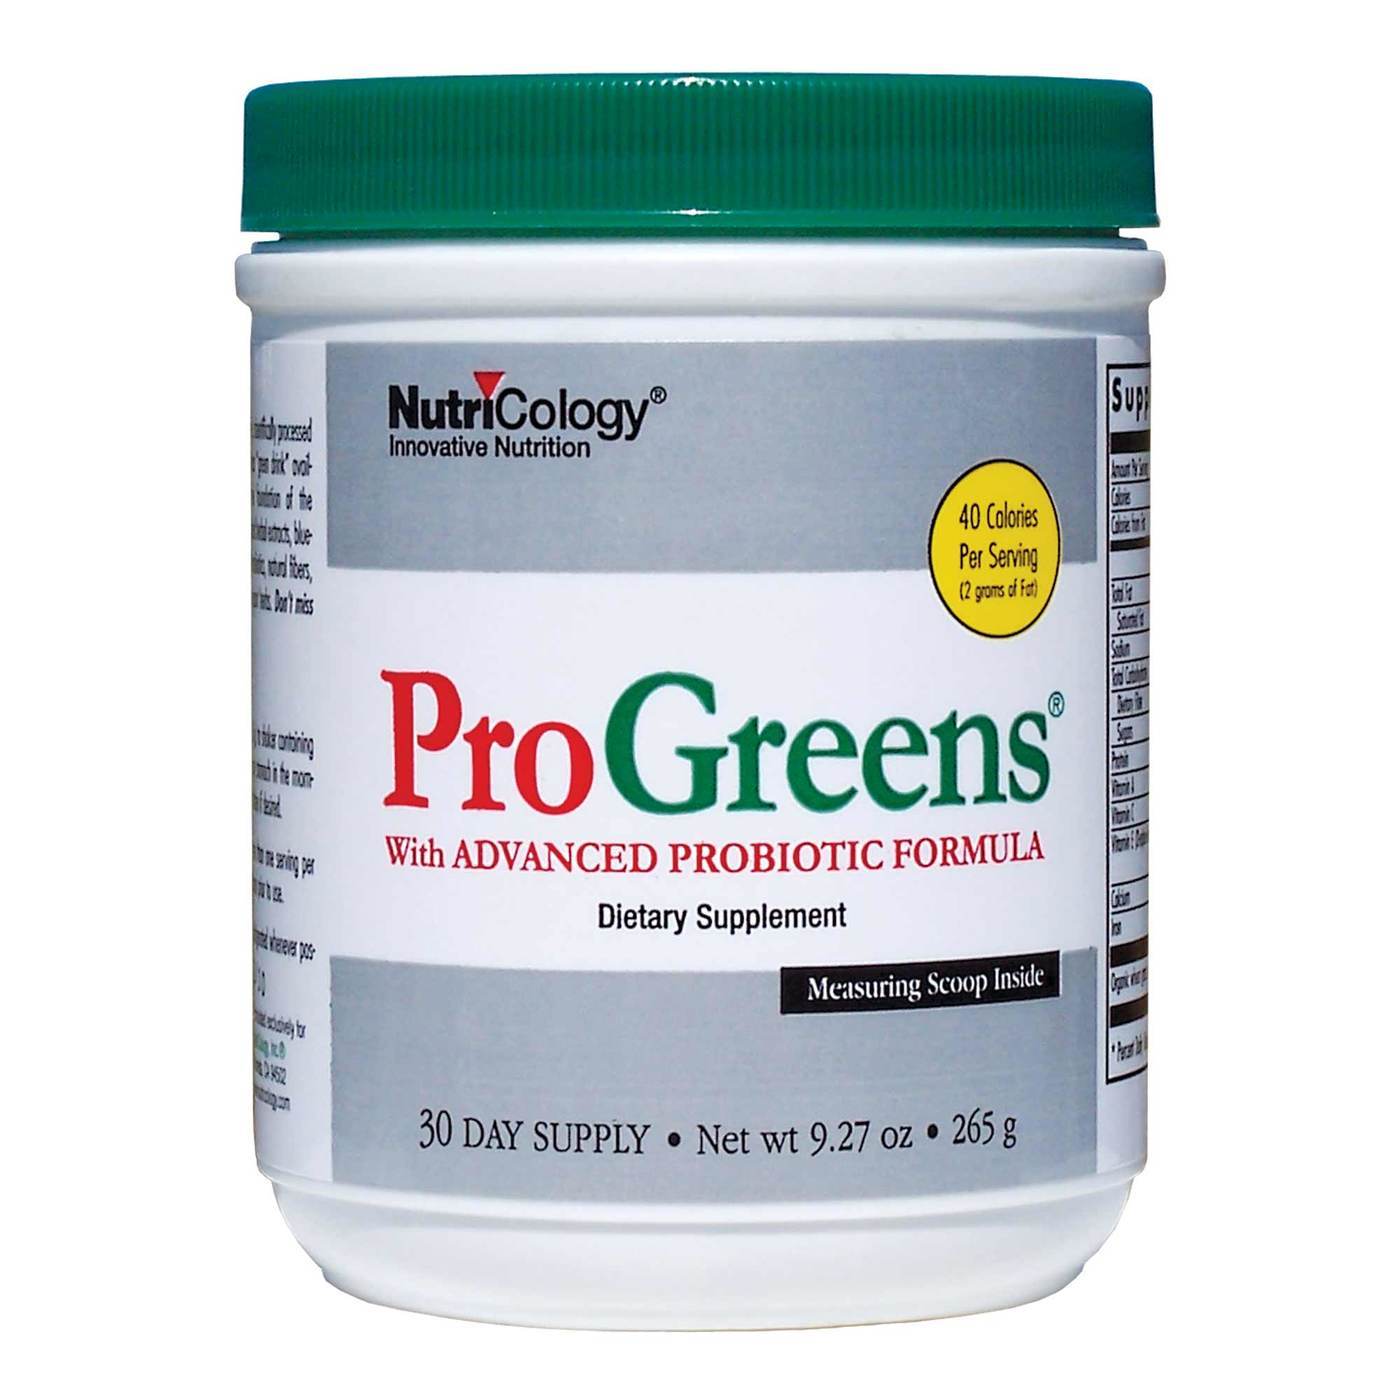 ProGreens Powder - 265g | Allergy Research Group